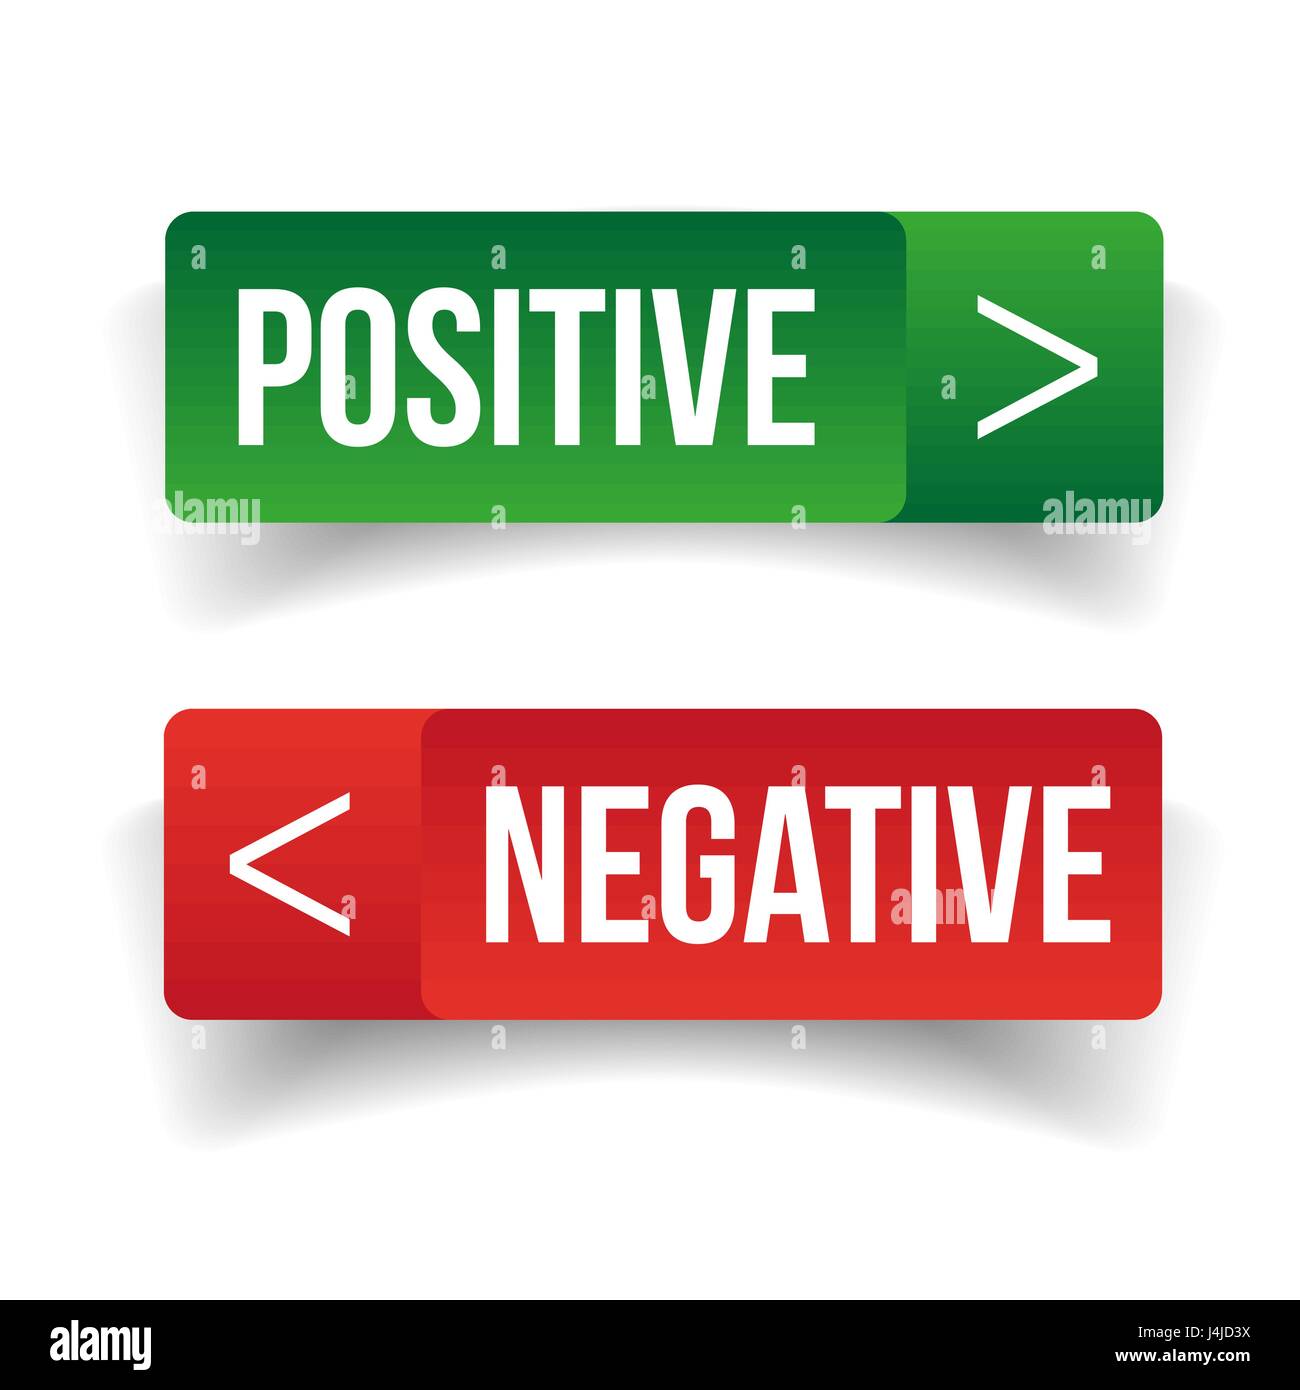 Positive from Negative